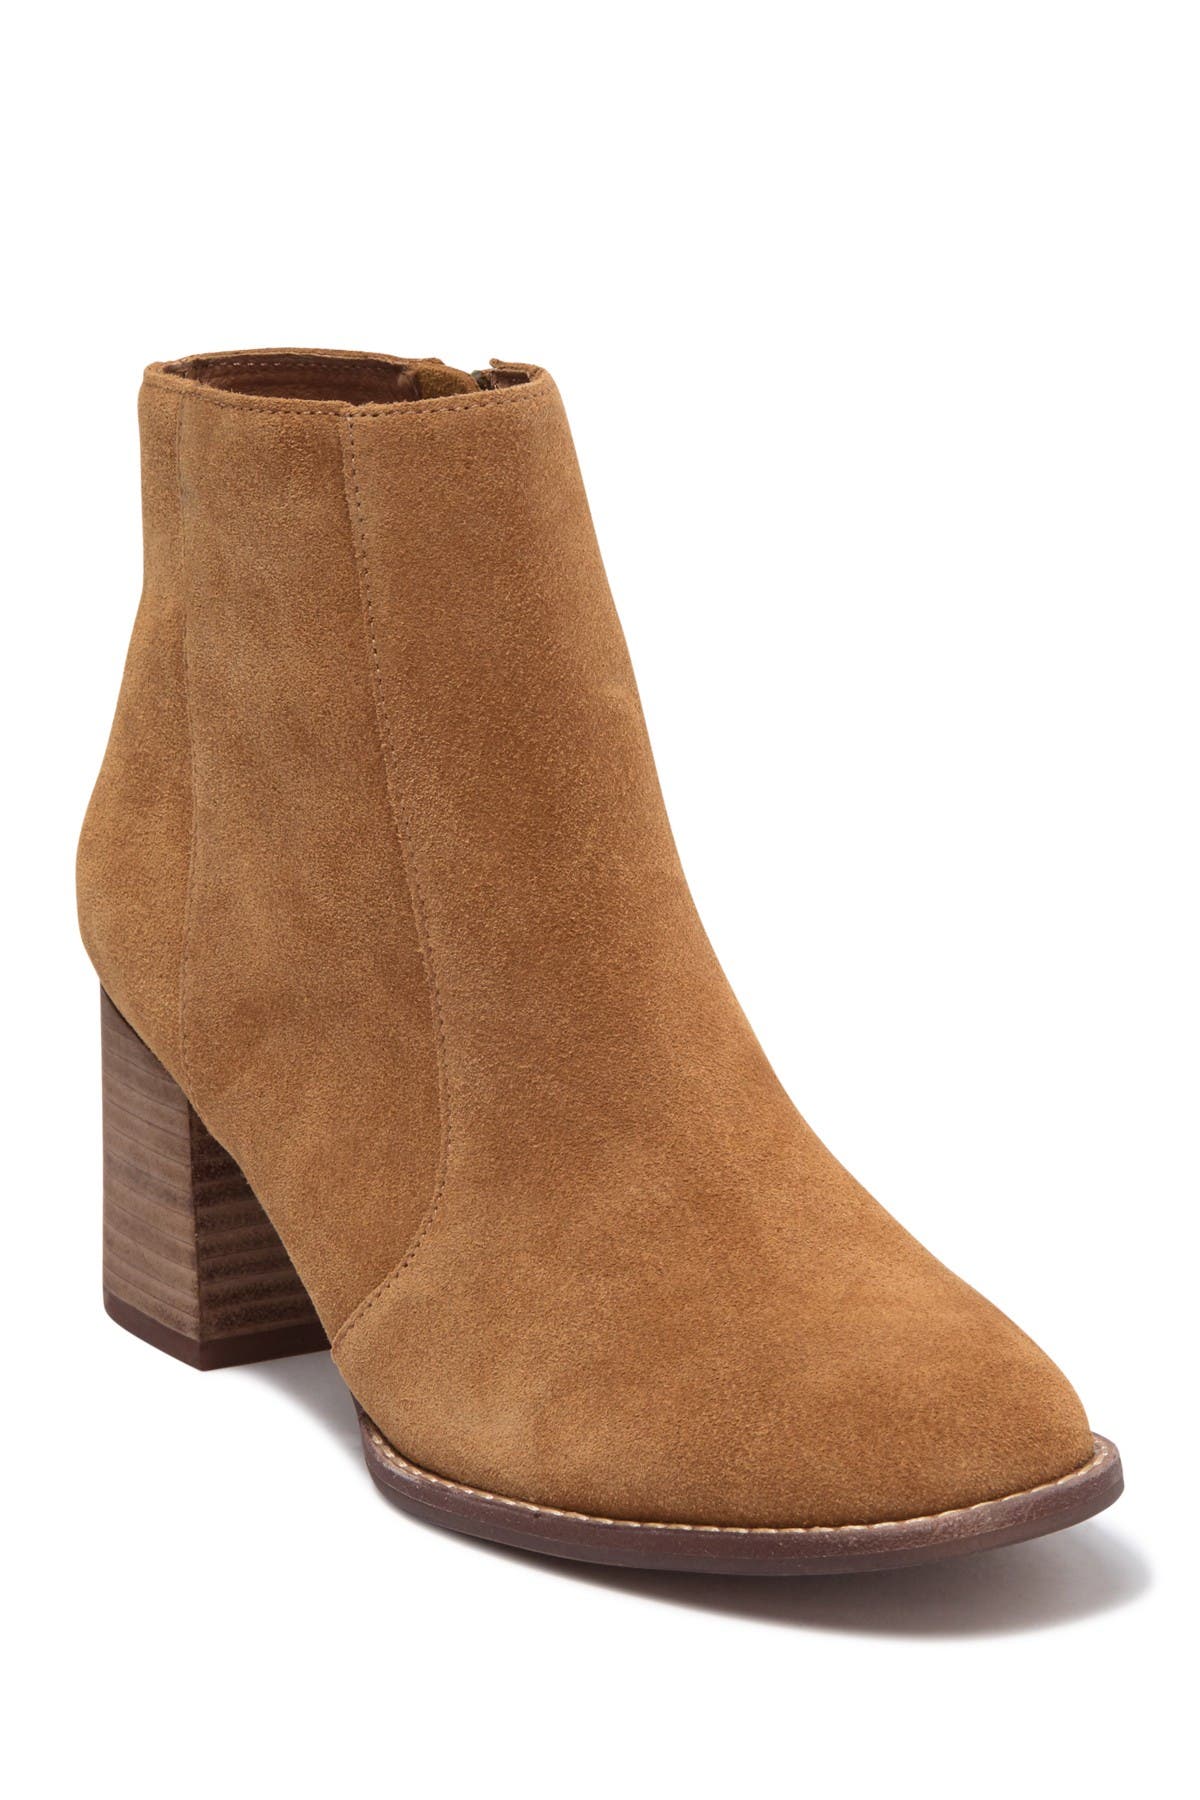 madewell boots nordstrom